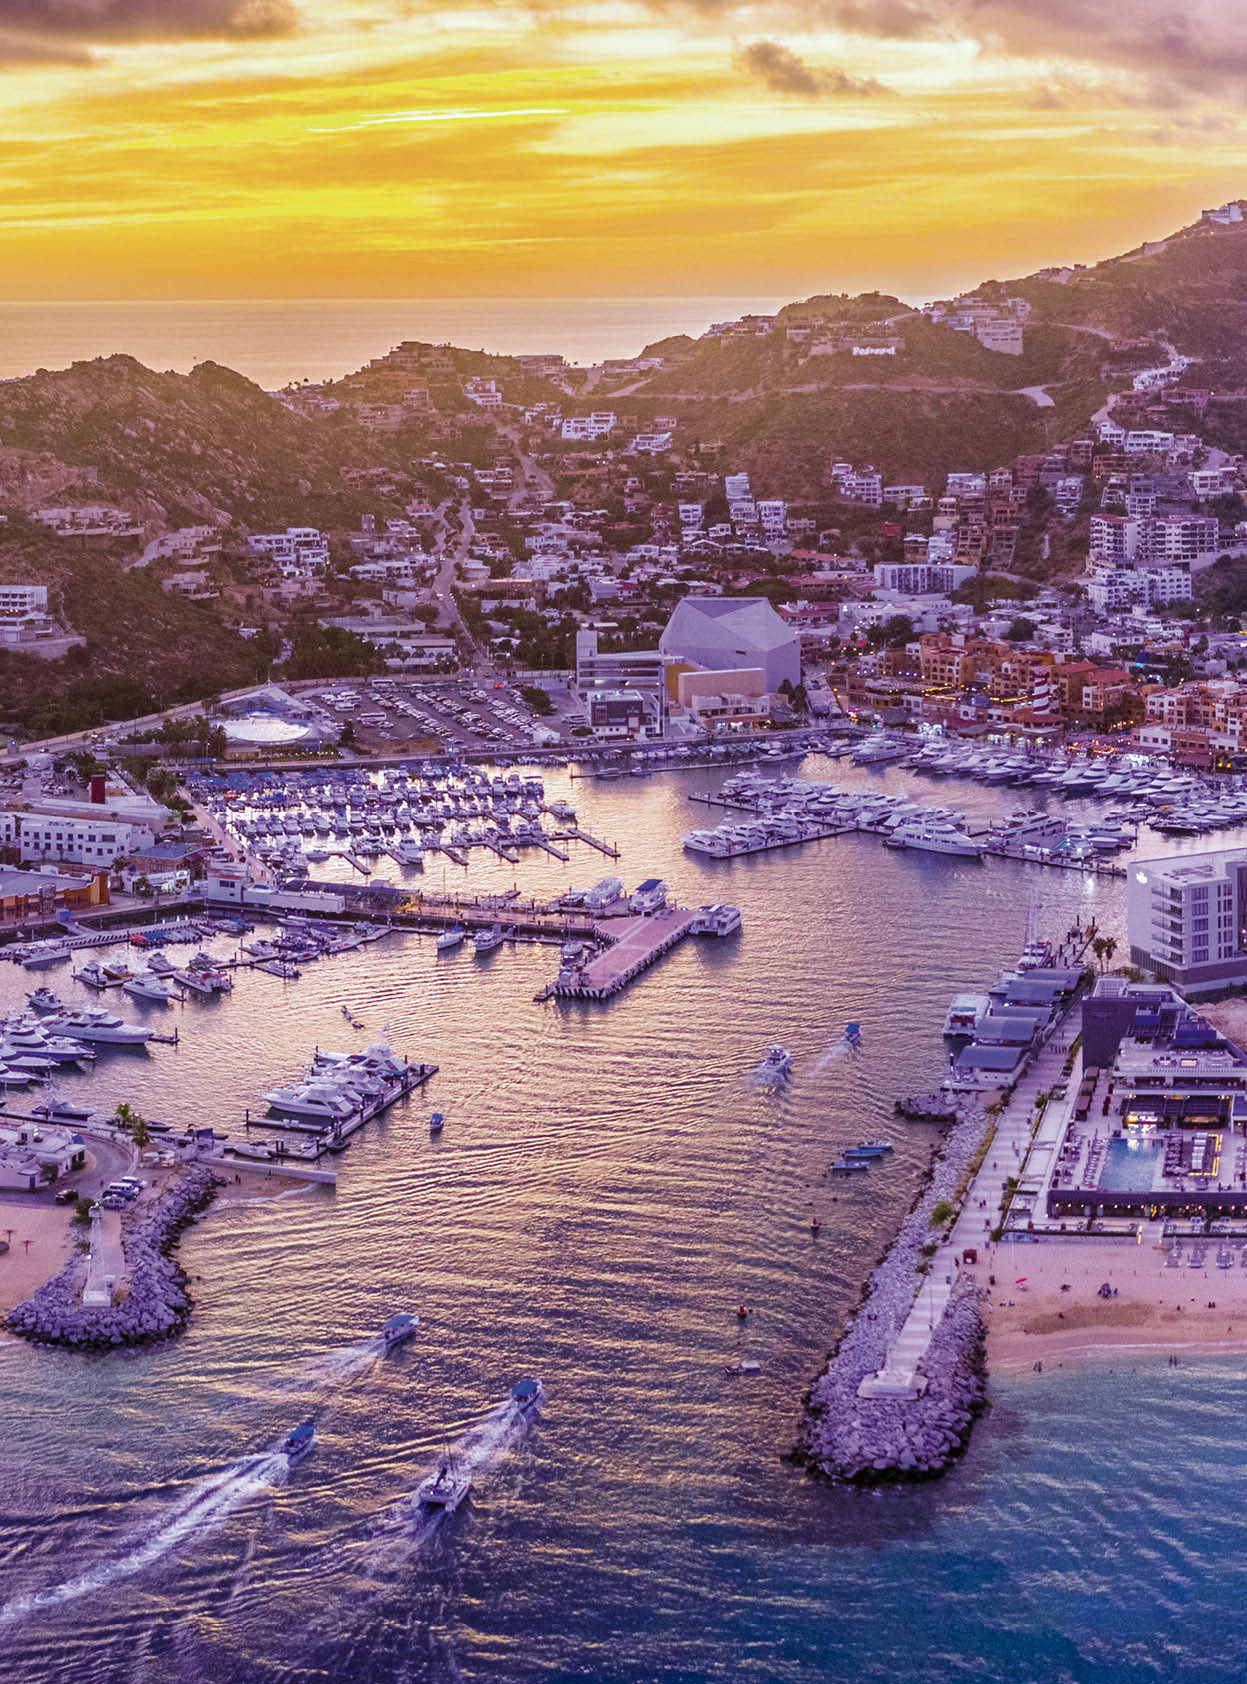 Aerial view of the cityscape of Cabo San Lucas, Mexico marina area at sunset - Los Cabos, Baja California Sur